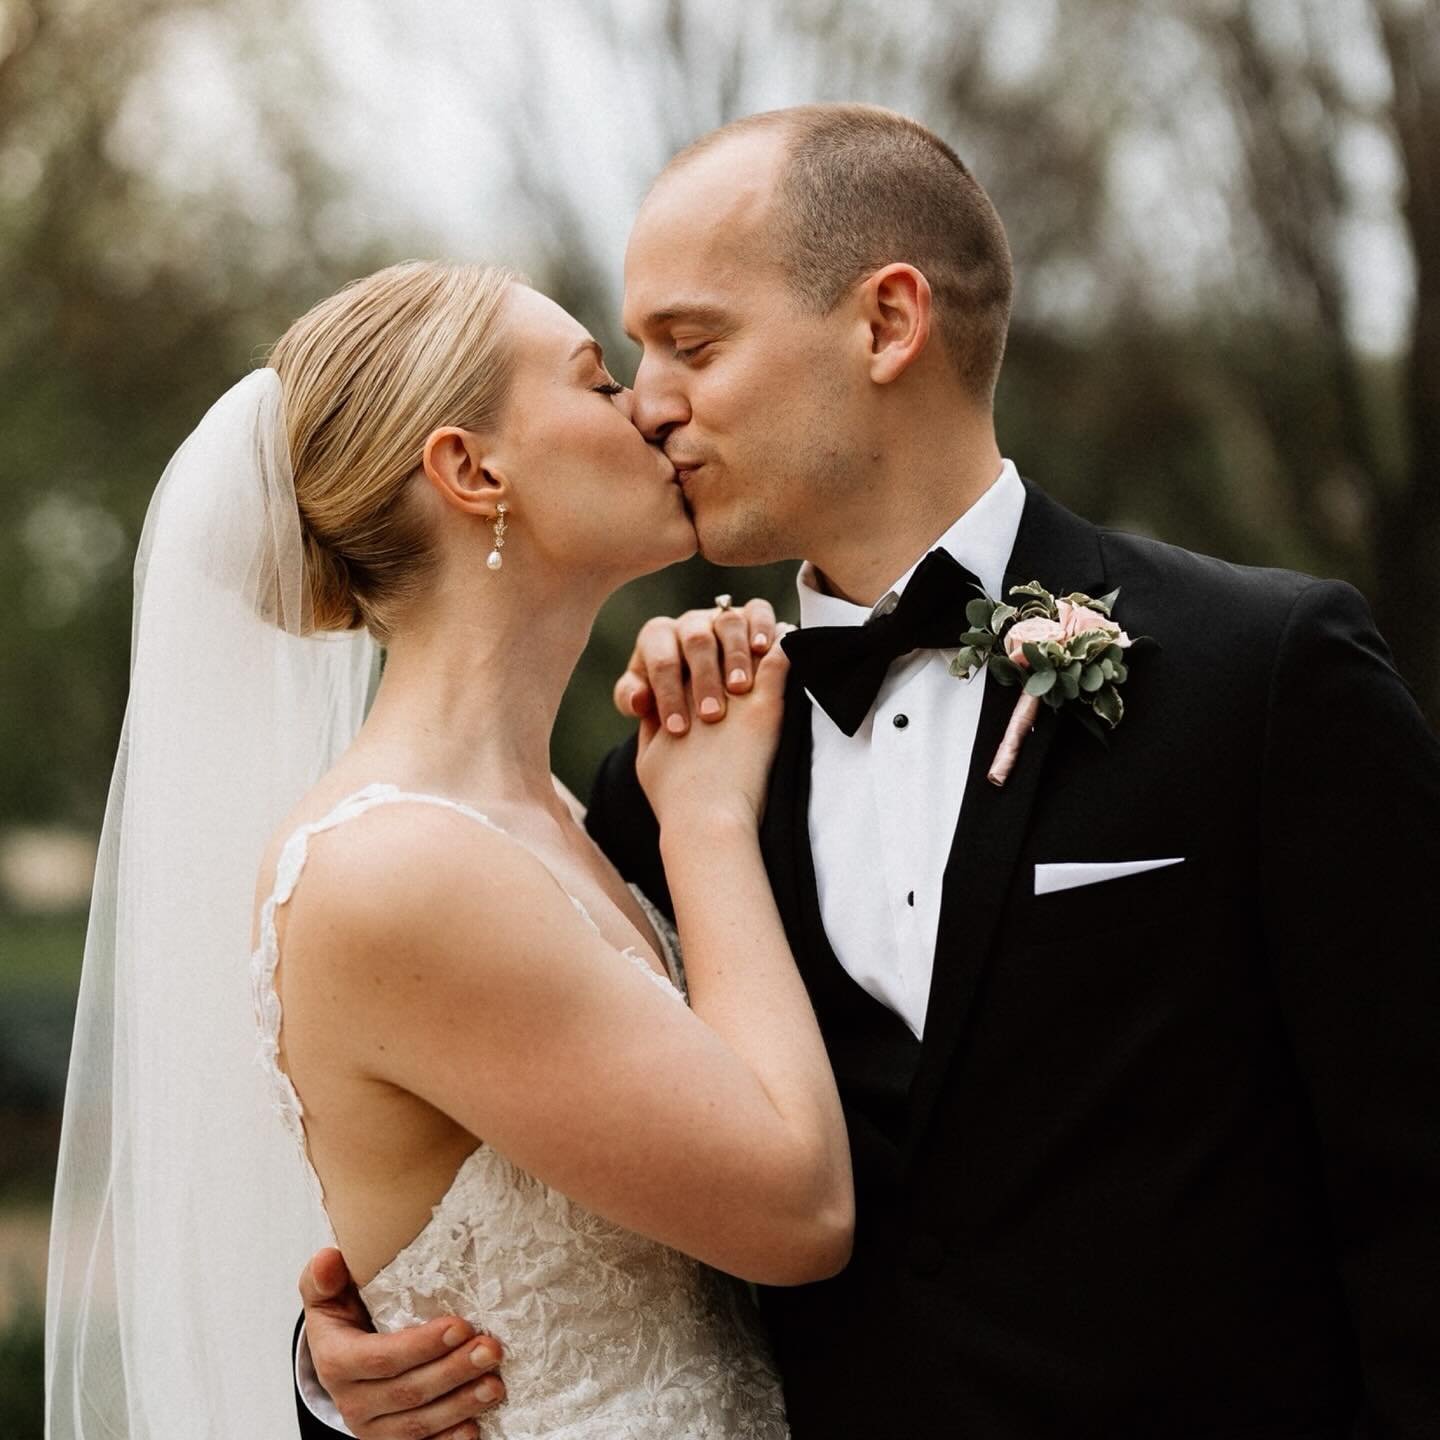 Claire + Michael

These two are as sweet as can be but also know how to throw one heck of a party. Their families are their heart and hospitality is at their core. It was a true joy to be there to capture it all. Congrats guys!!

#columbuswedding #co